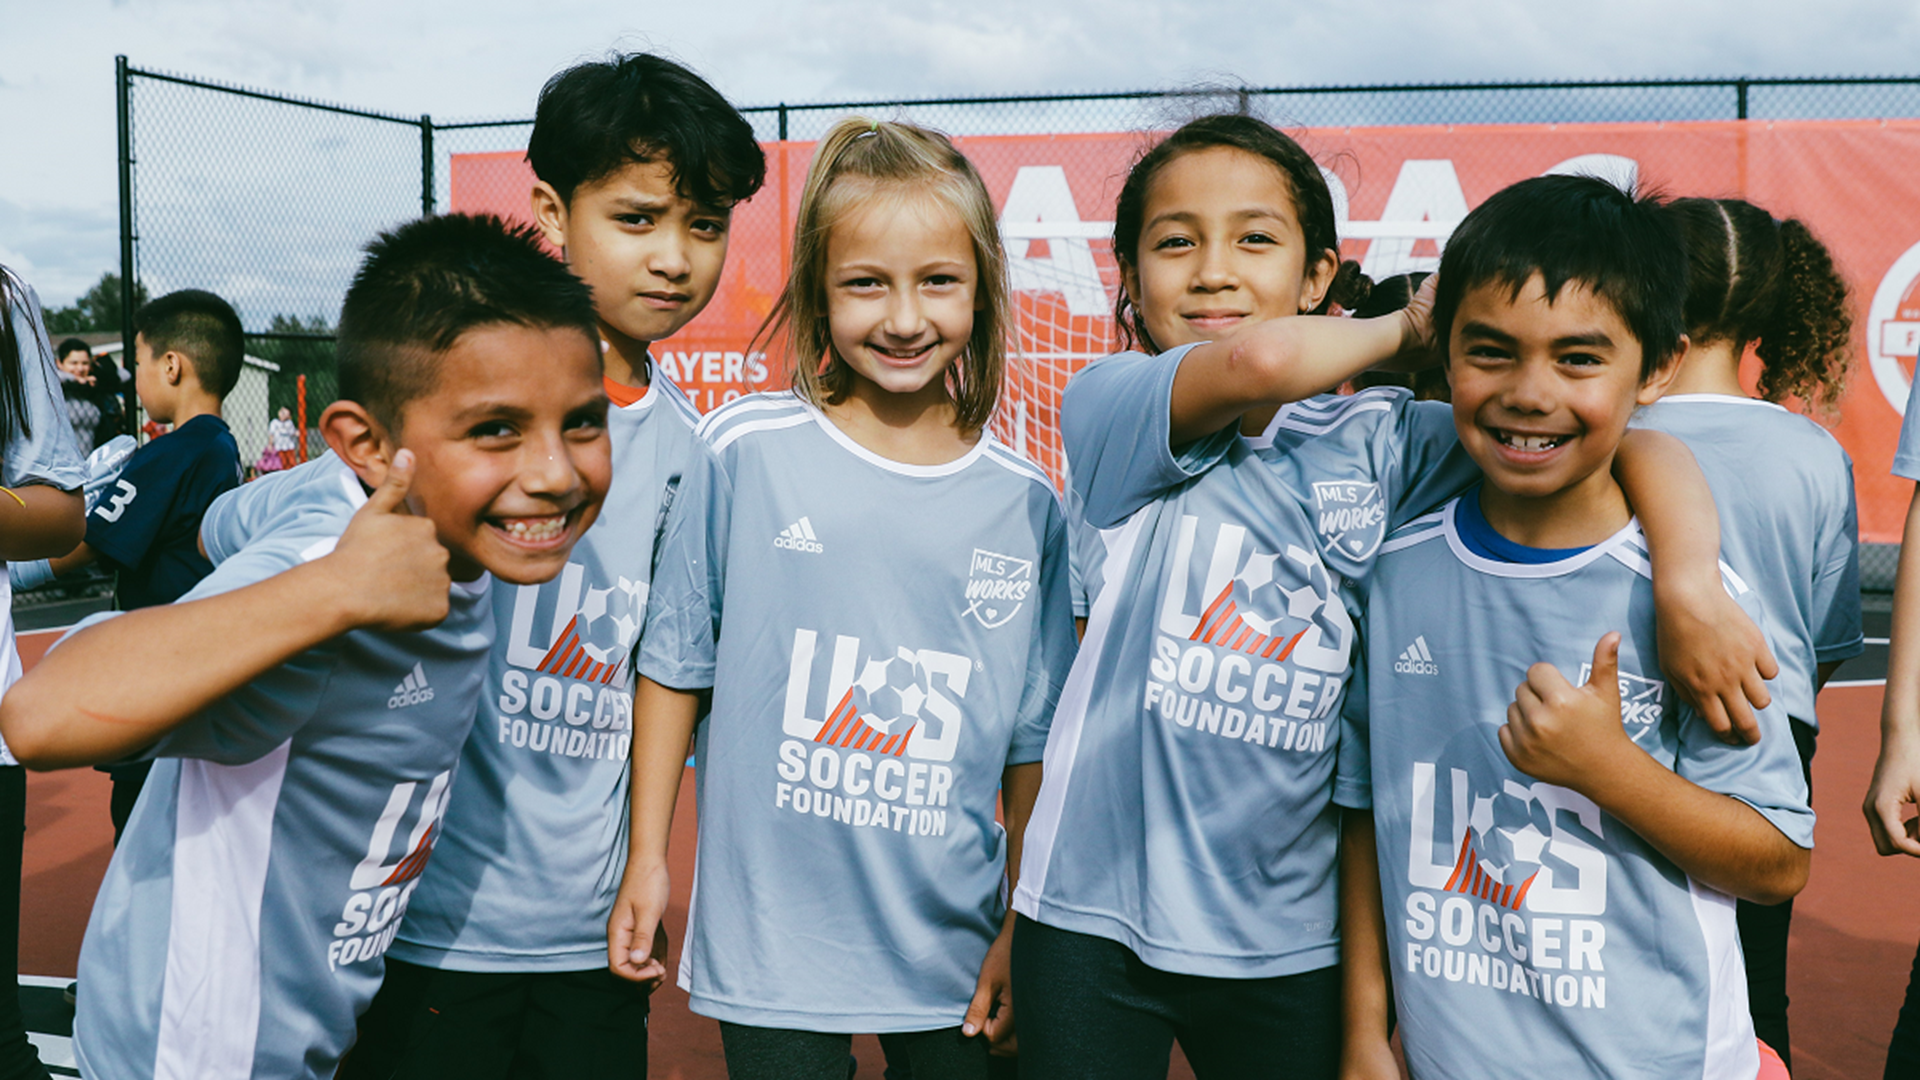 Soccer for Success provides kids in low-income communities the opportunity to play and learn Soccer and has lifelong benefits.